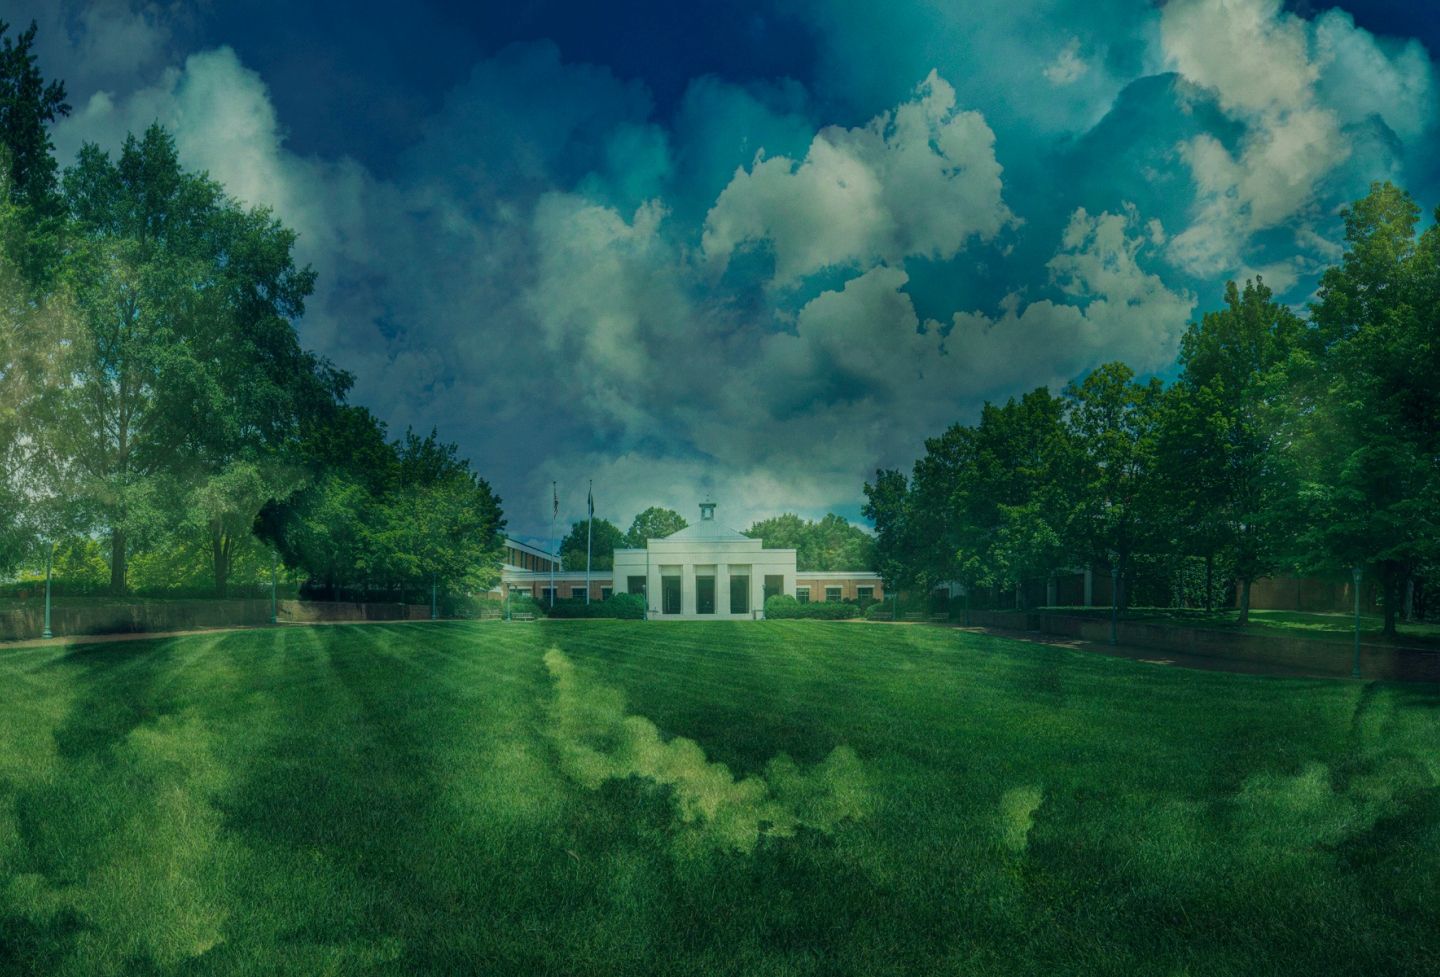 UVA Law School image with clouds overlaid